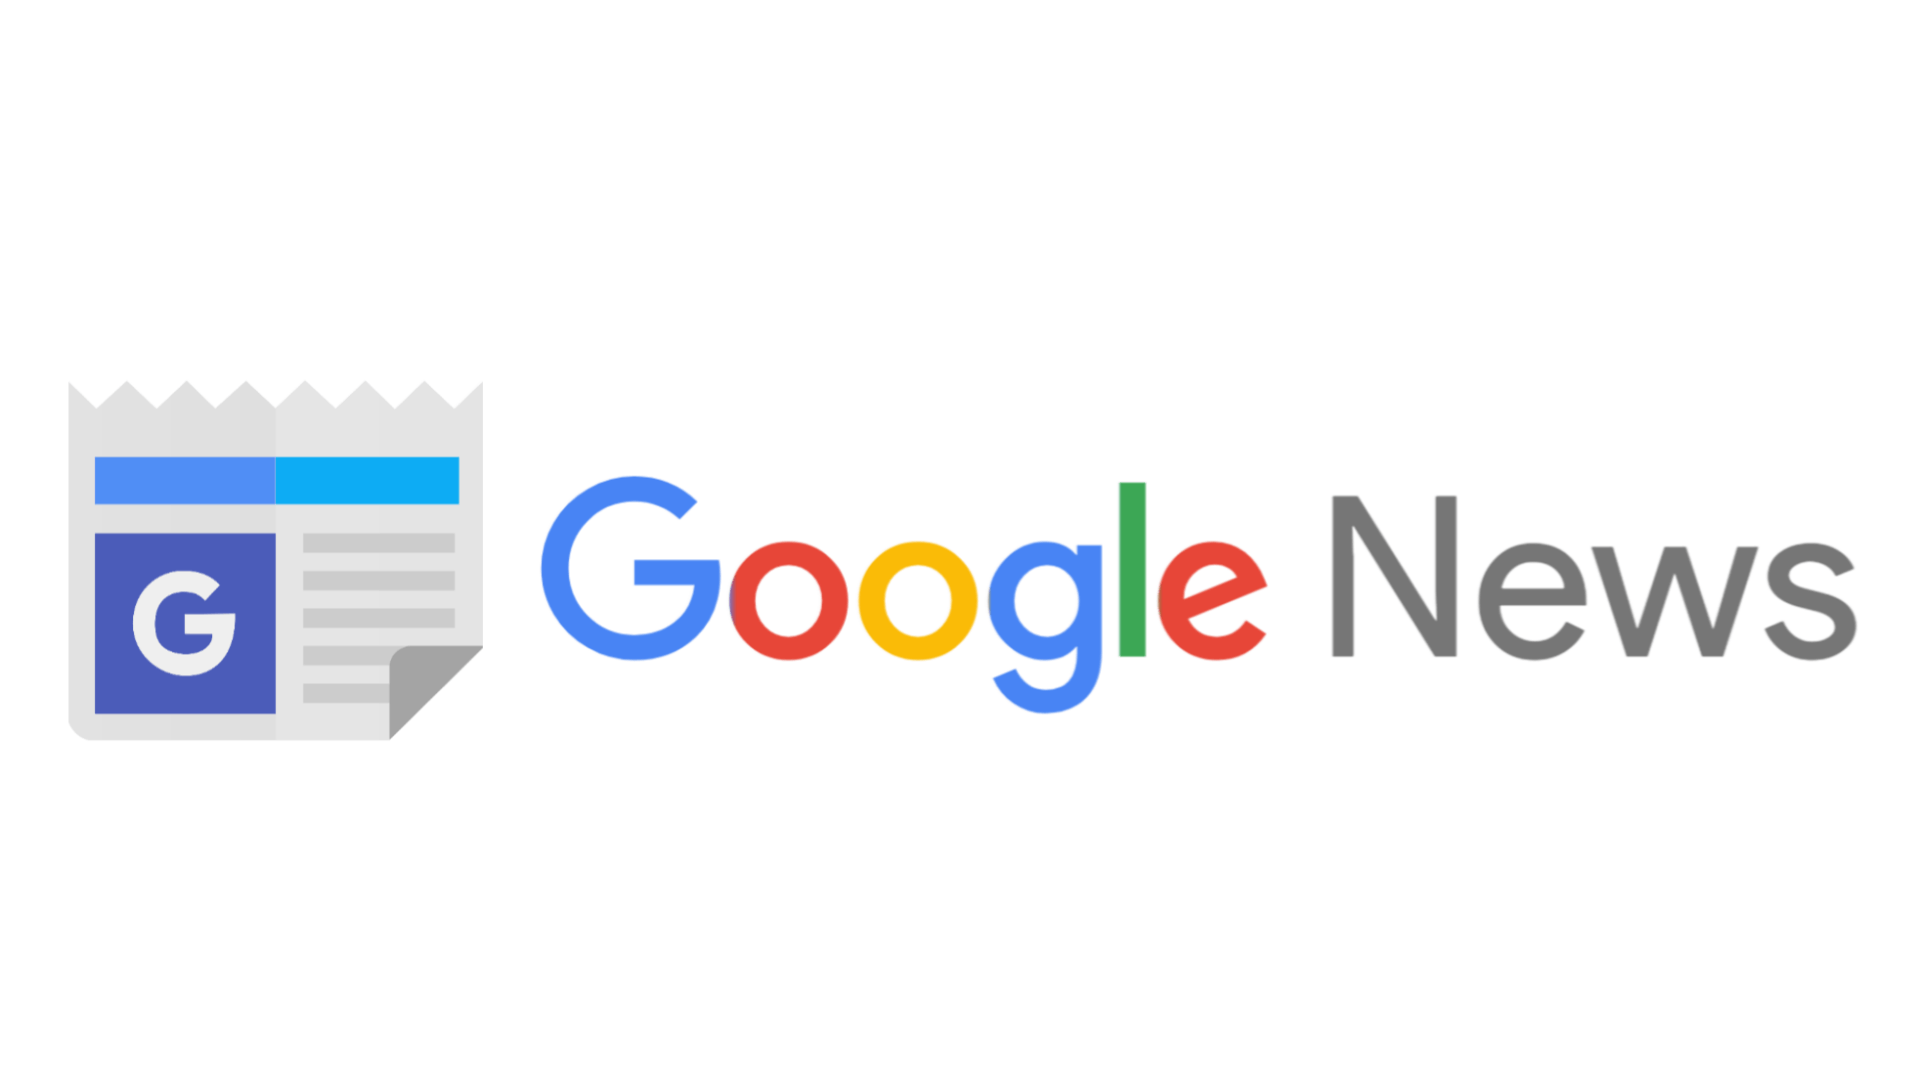 Learn How to Stay Up to Date with News from the Google News App